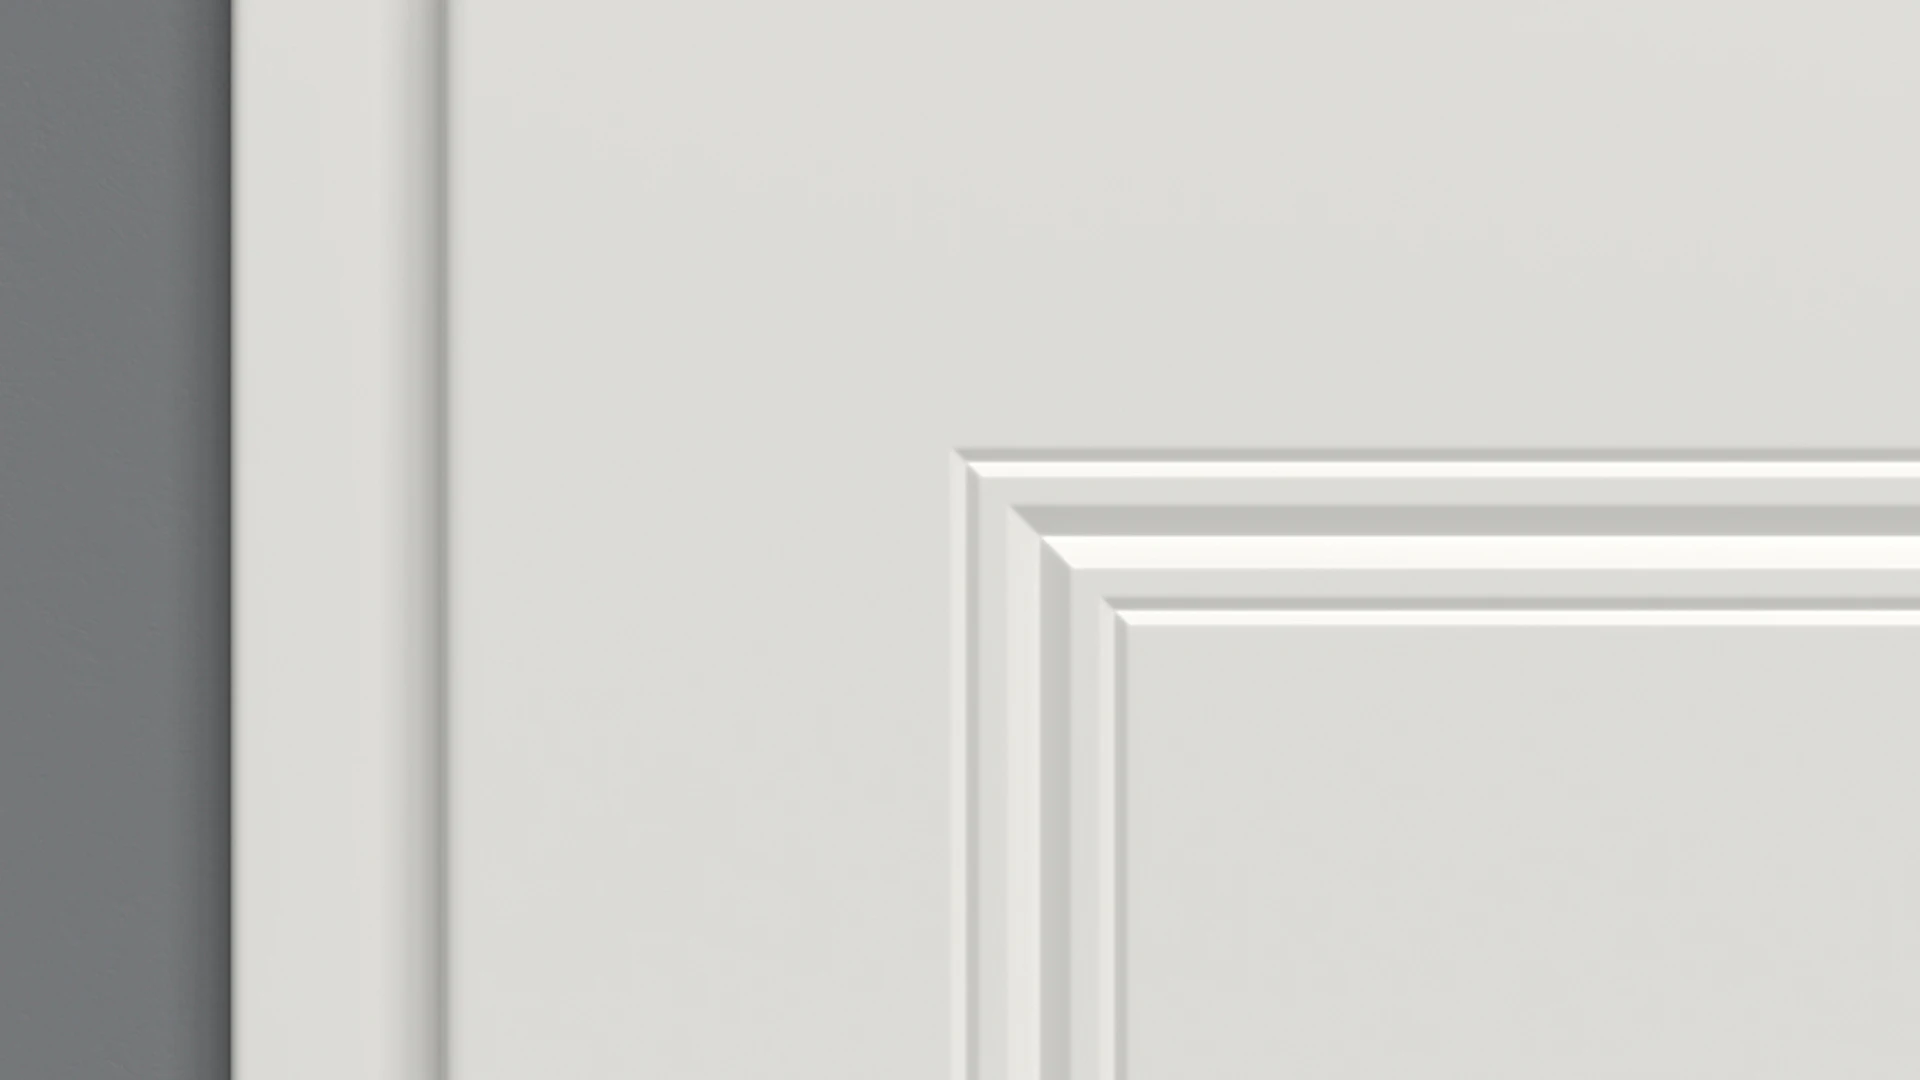 planeo interior door lacquer 2.0 - Arno 9010 white lacquer 1985 x 860 mm DIN L - round RSP hinge 3-t